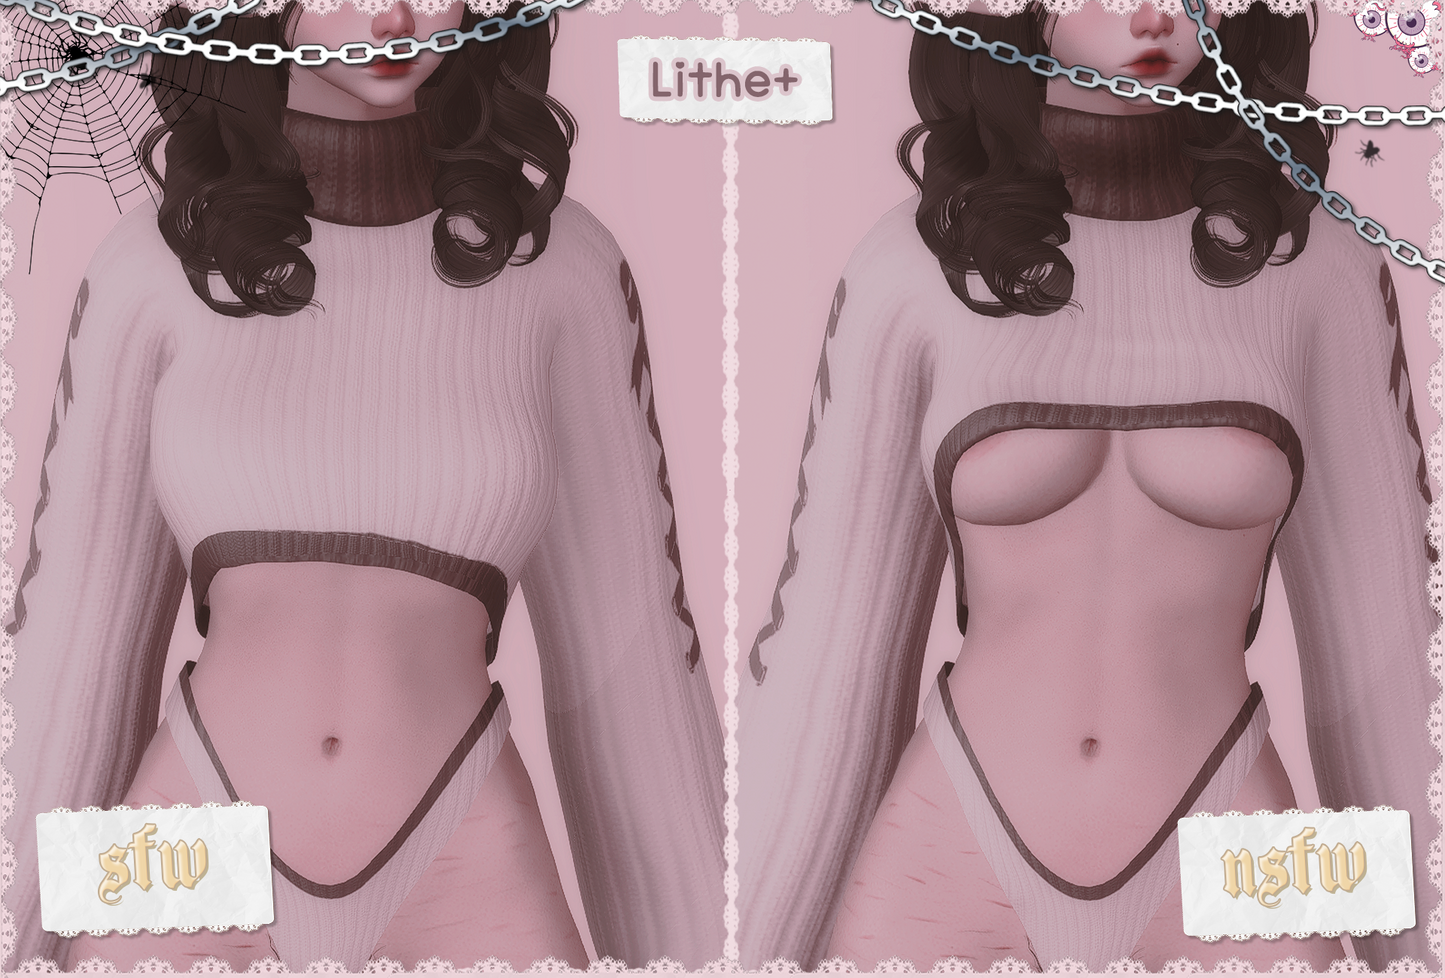 petit cozy — (n)sfw & squishy outfit for bibo+